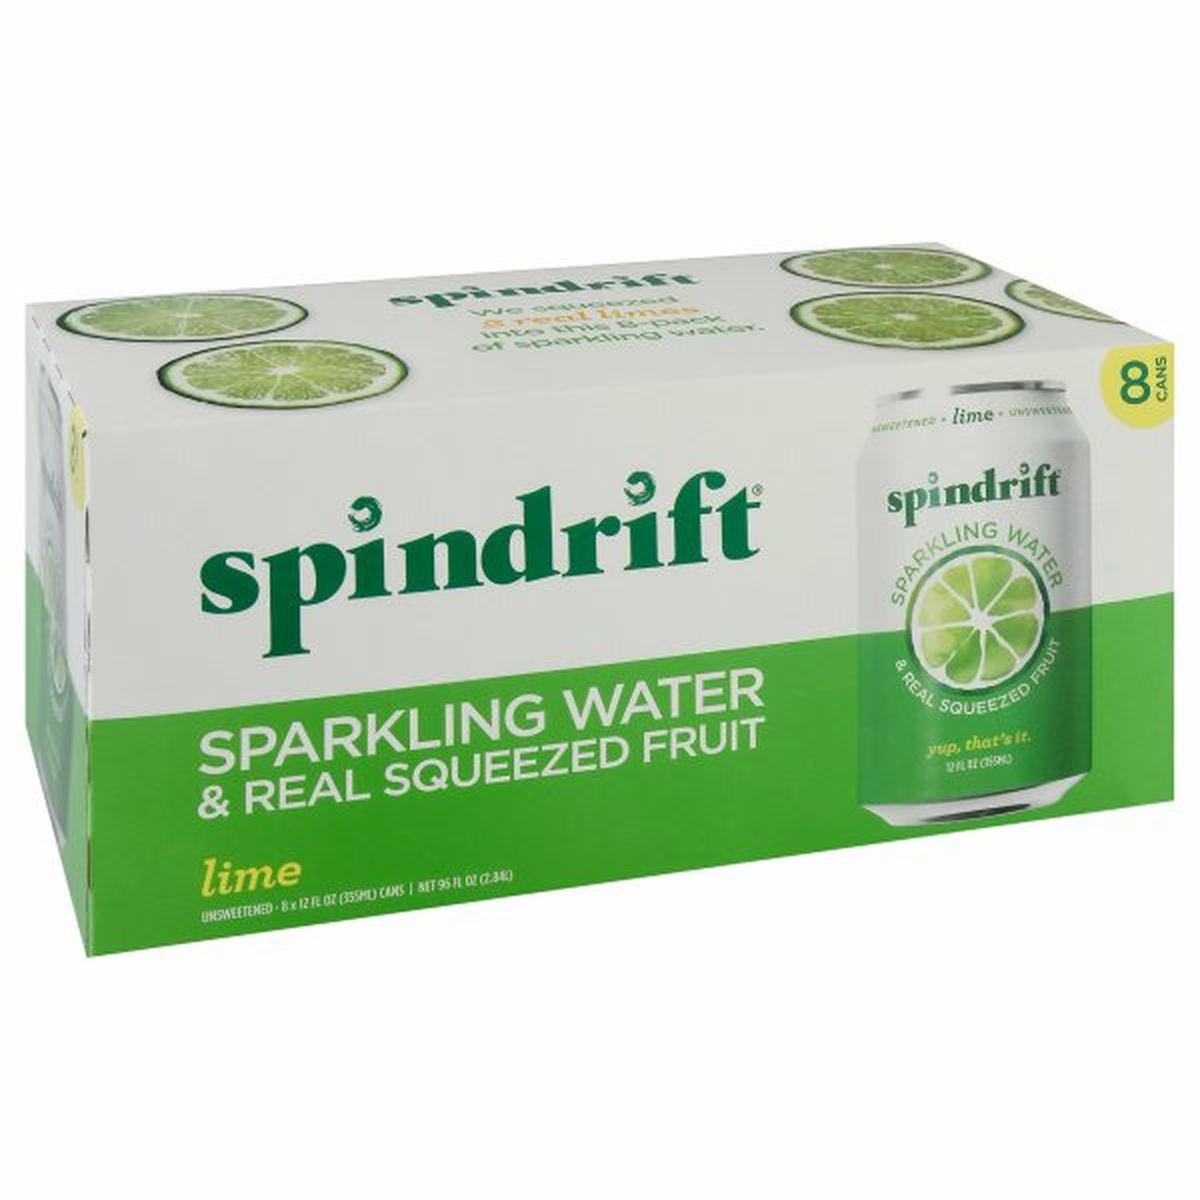 Calories in Spindrift Sparkling Water, Lime